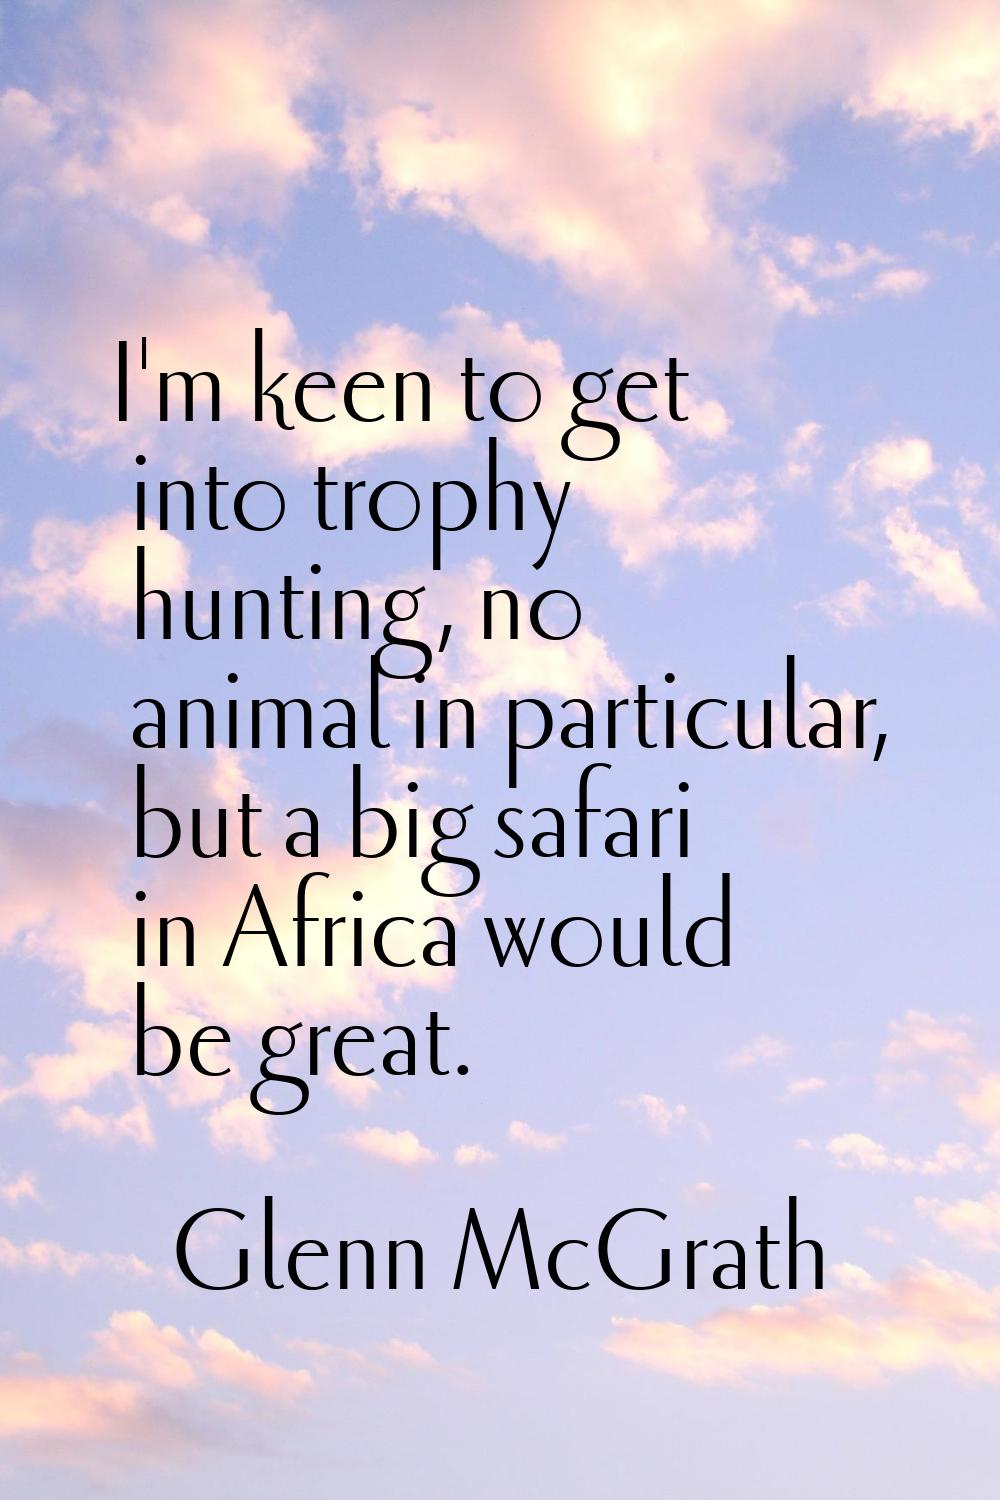 I'm keen to get into trophy hunting, no animal in particular, but a big safari in Africa would be g